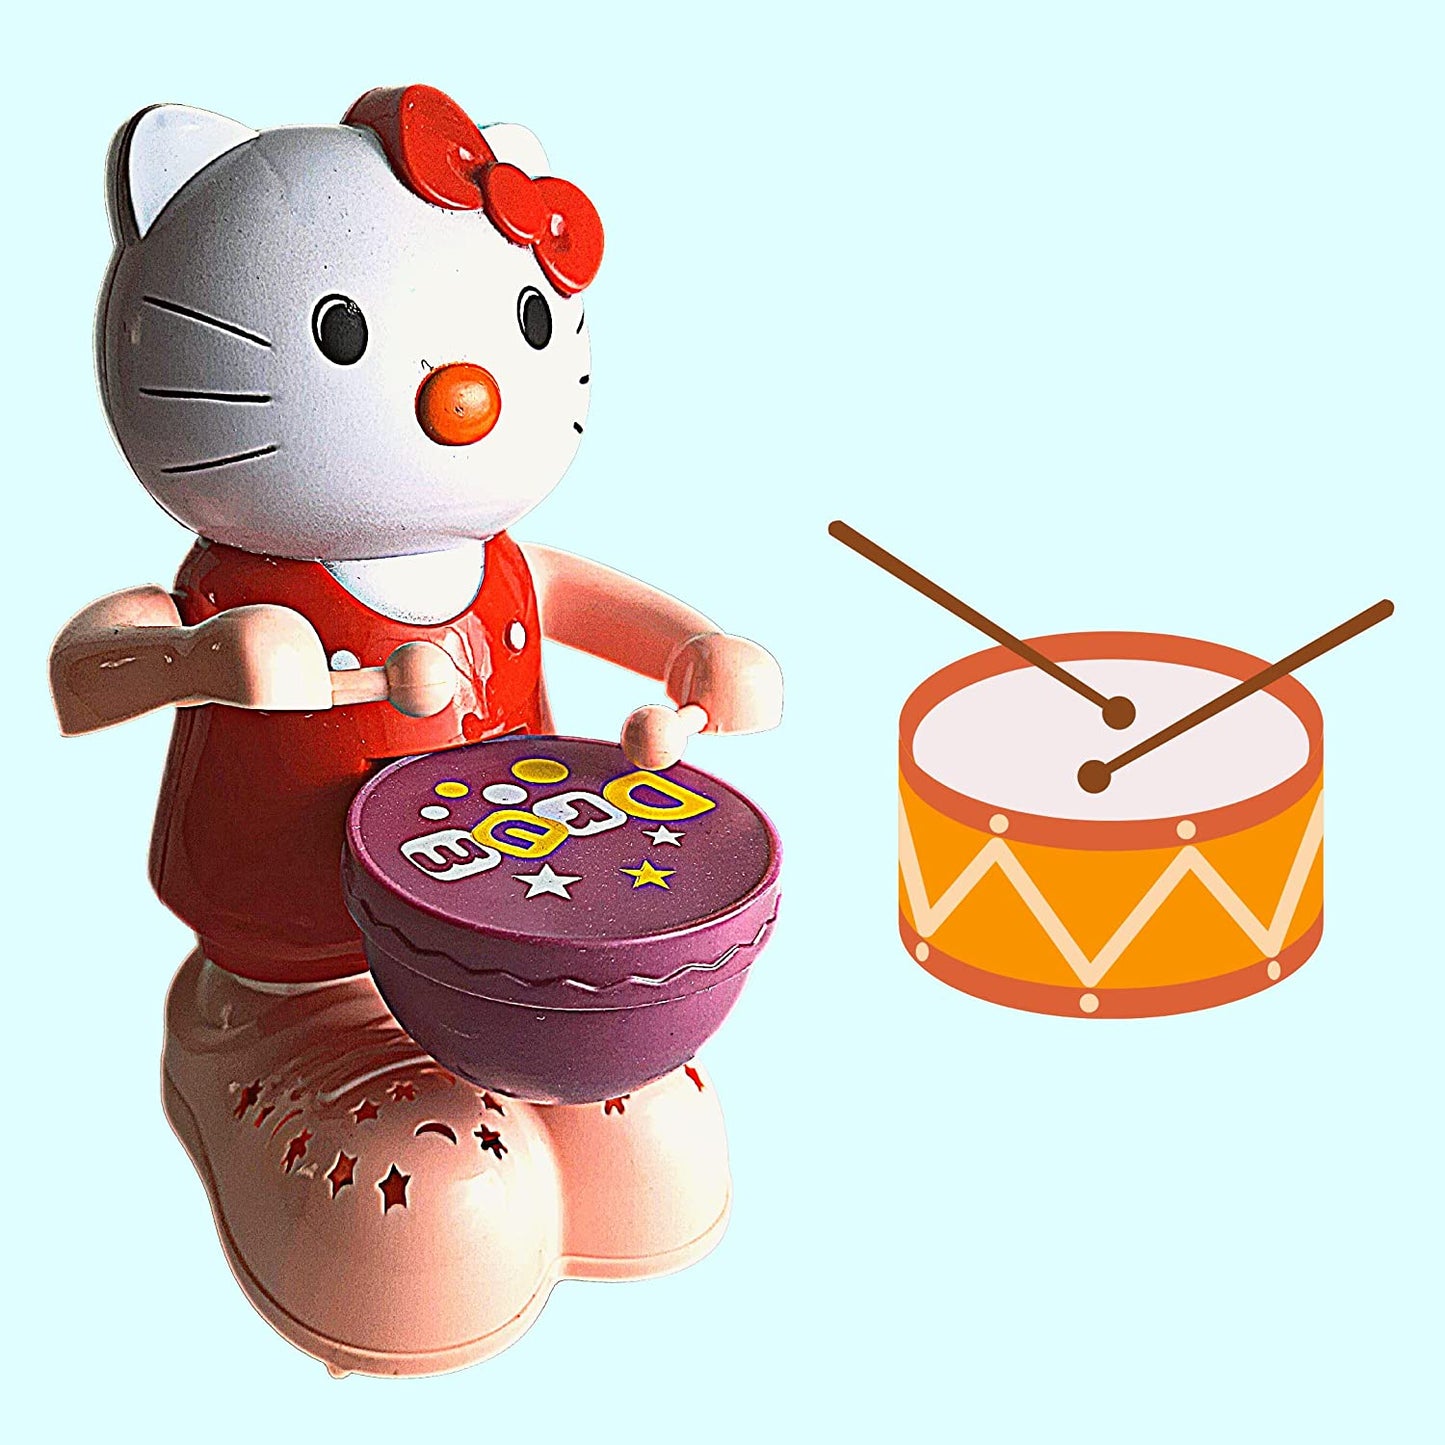 MM TOYS Funny Drummer Musical Toy - Rotational Movement, Battery Operated for Kids (Age 3+)